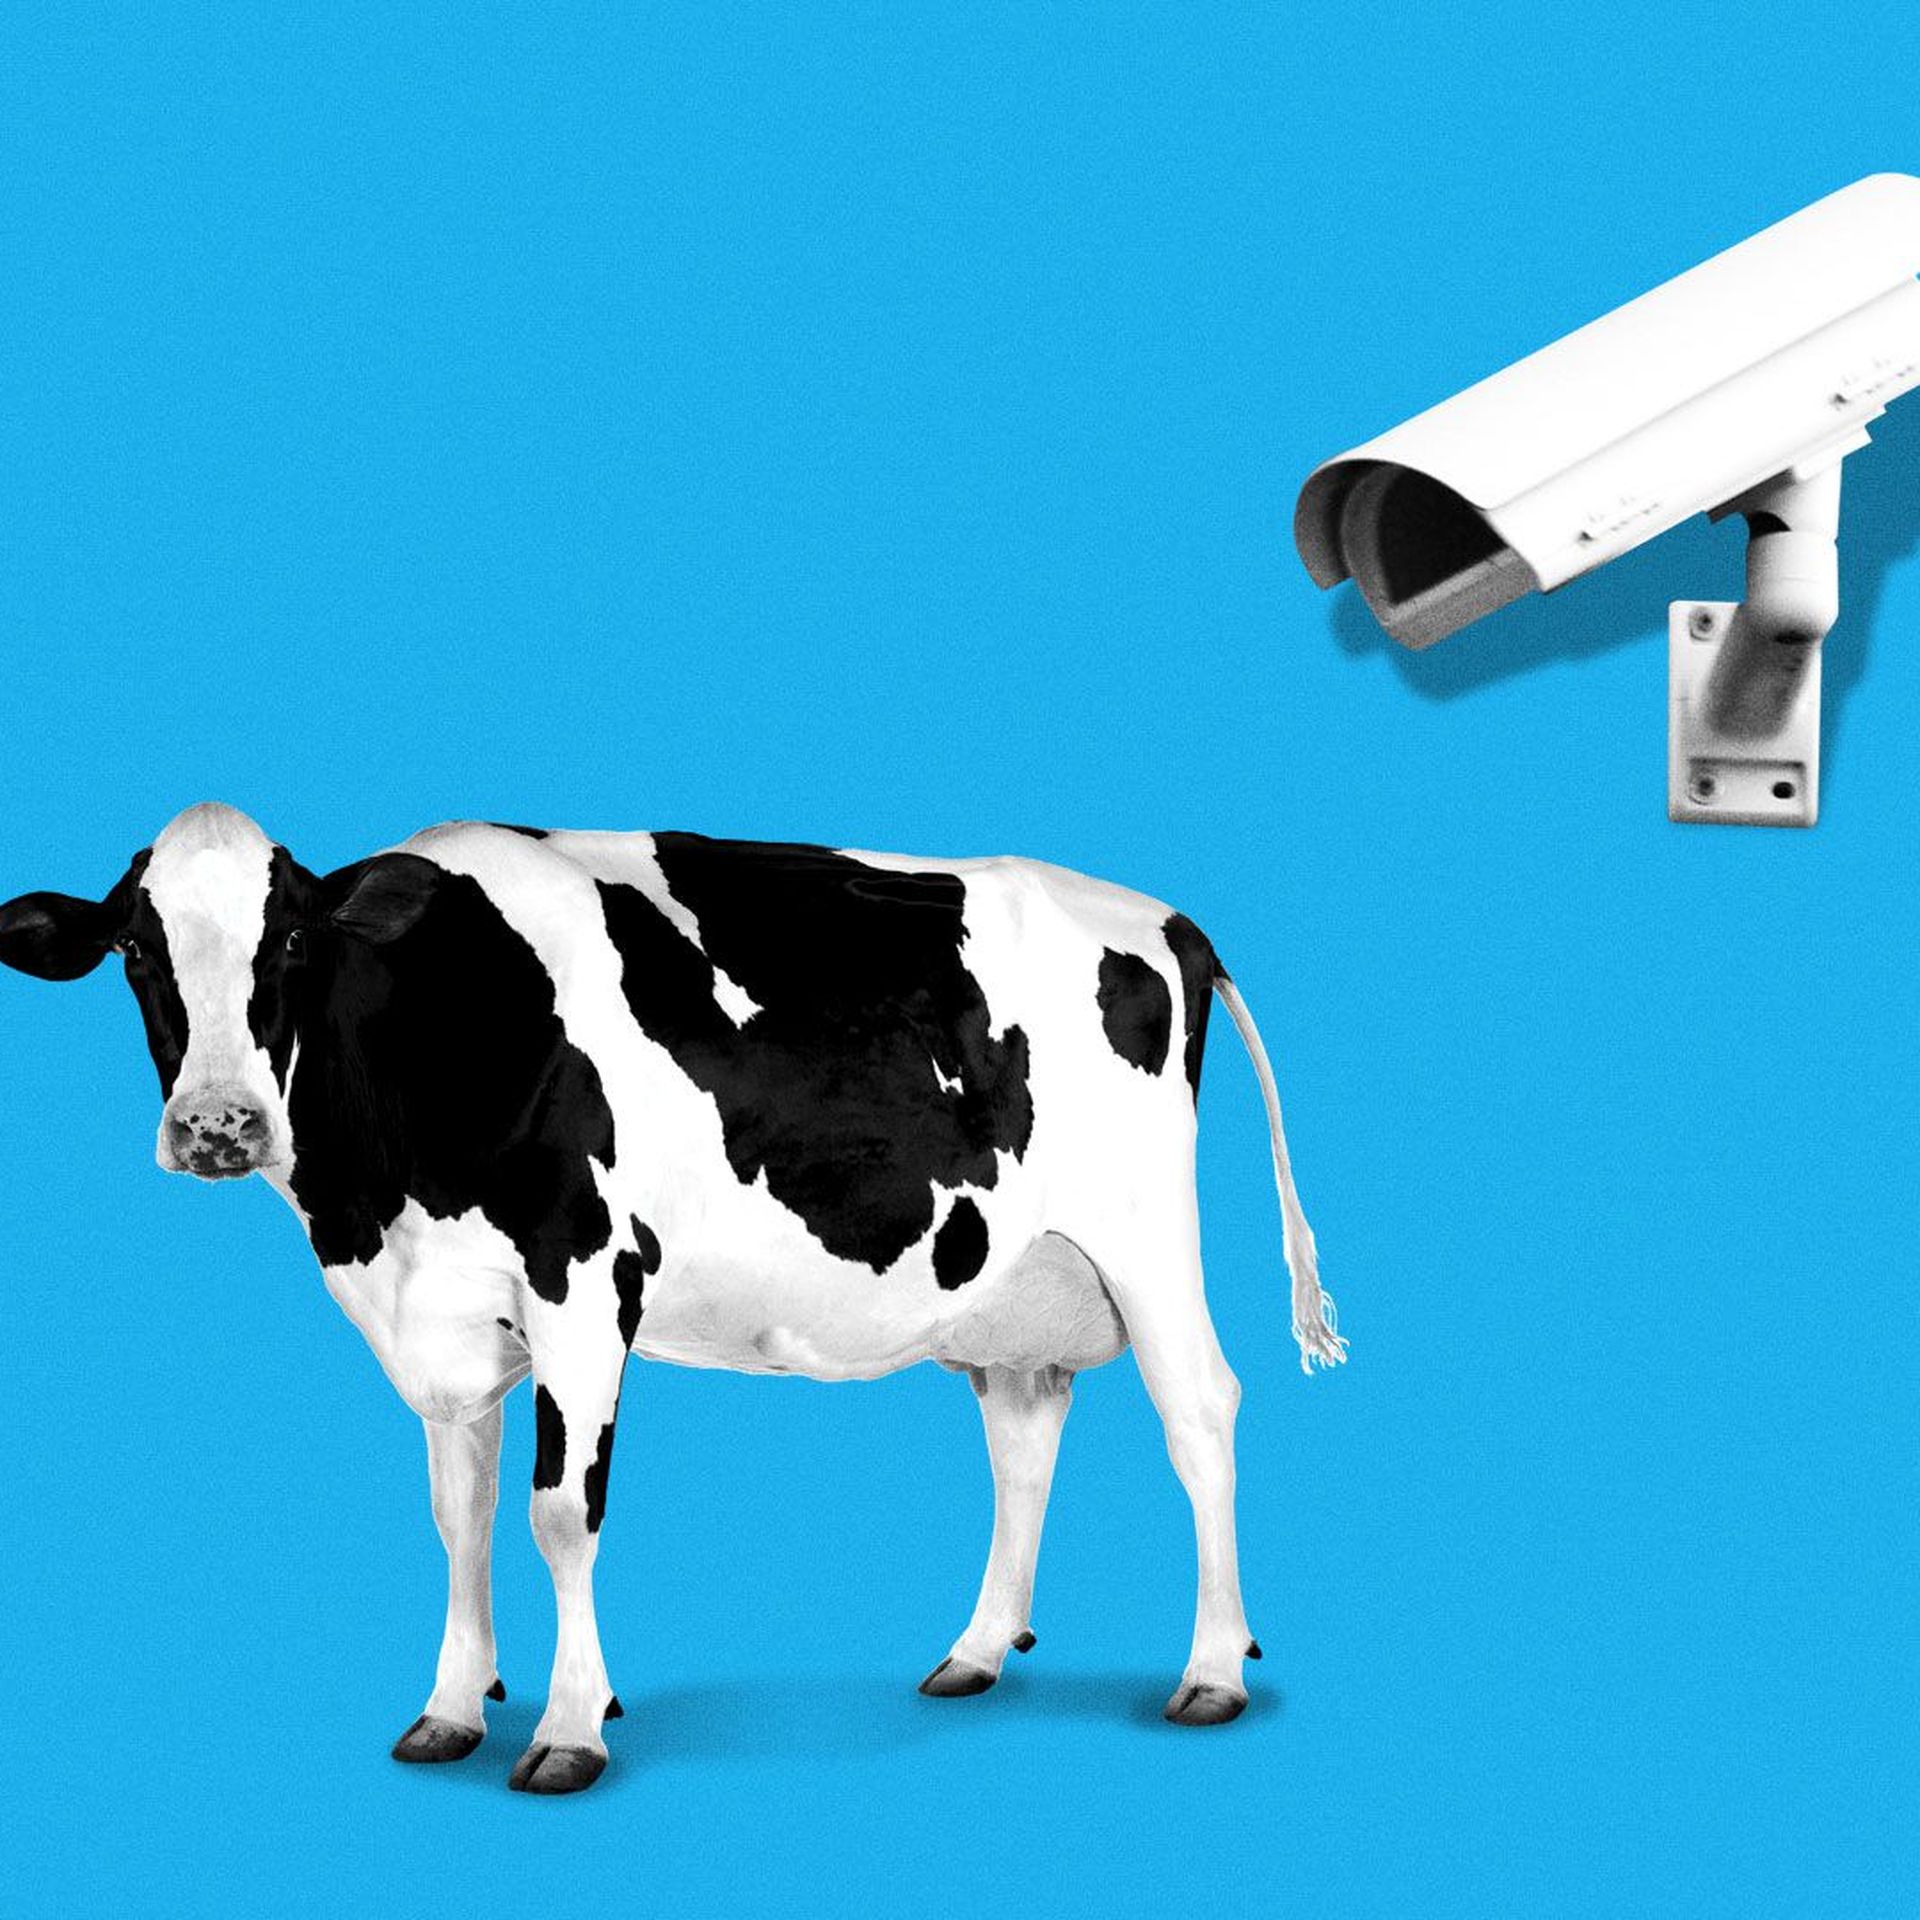 Illustration of security camera watching a cow